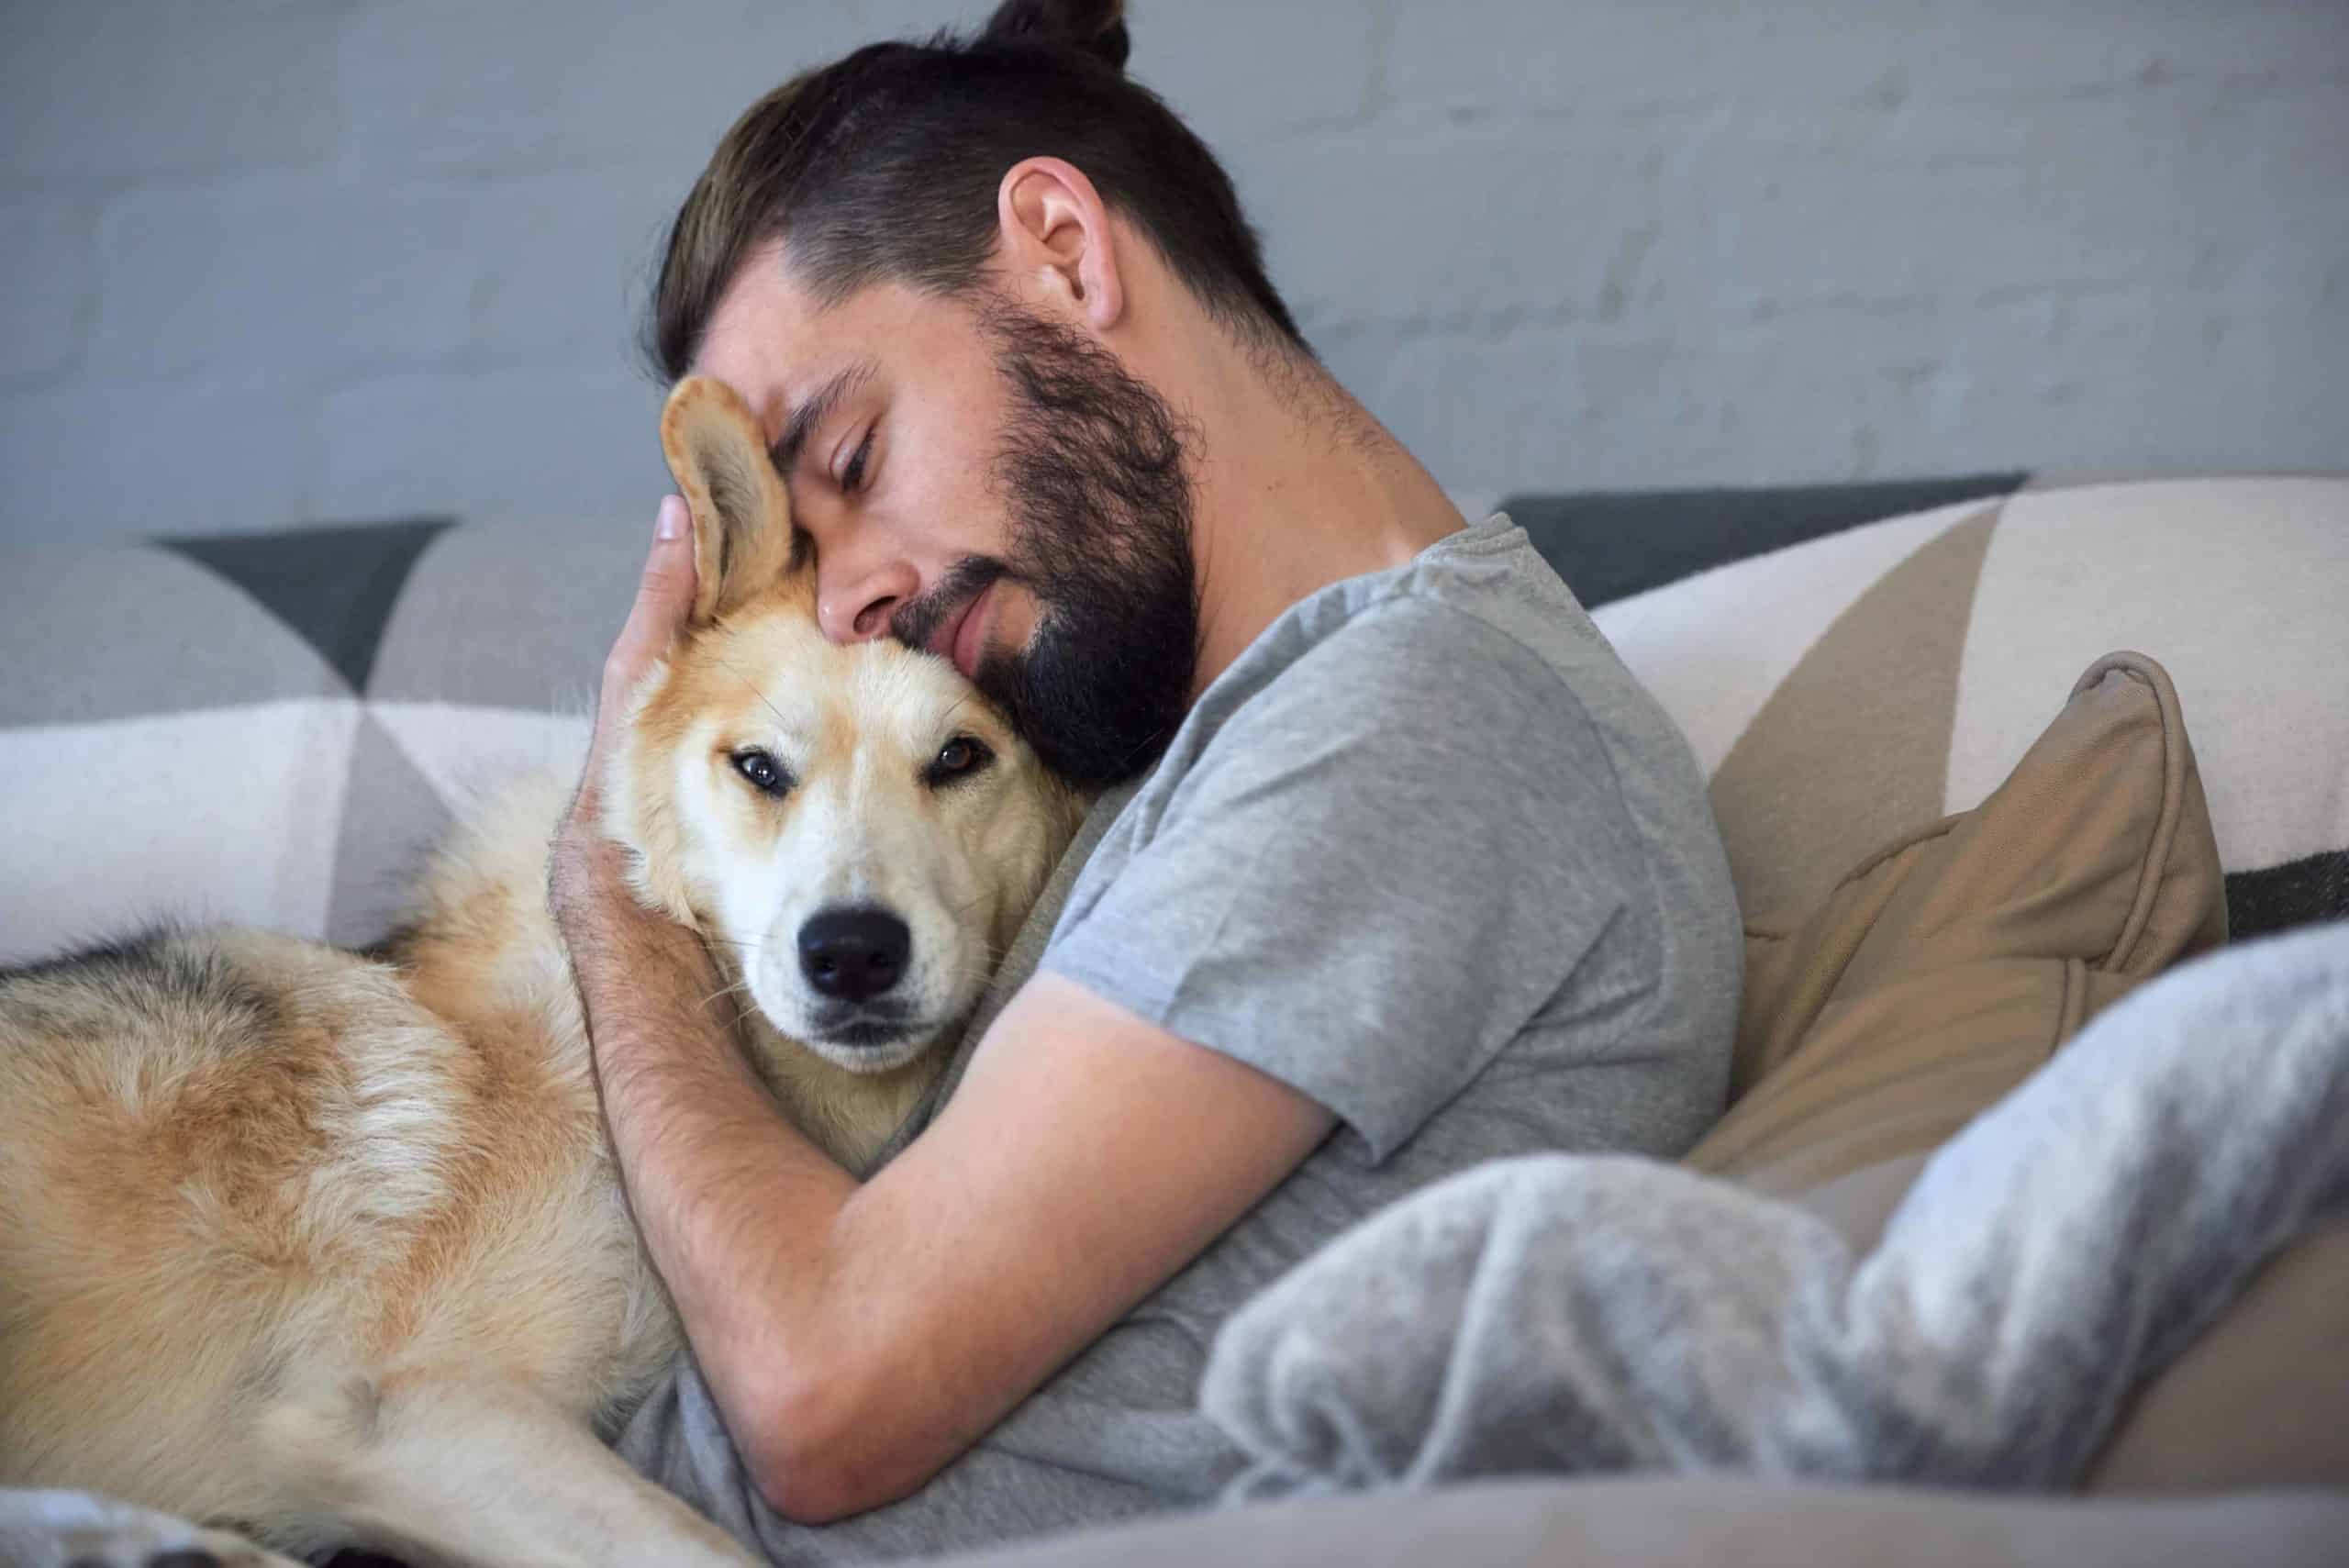 Man cuddles with German Shepherd. Securing an ESA Letter for Housing can be easy. Use this guide to complete the process in the most convenient and affordable way possible.